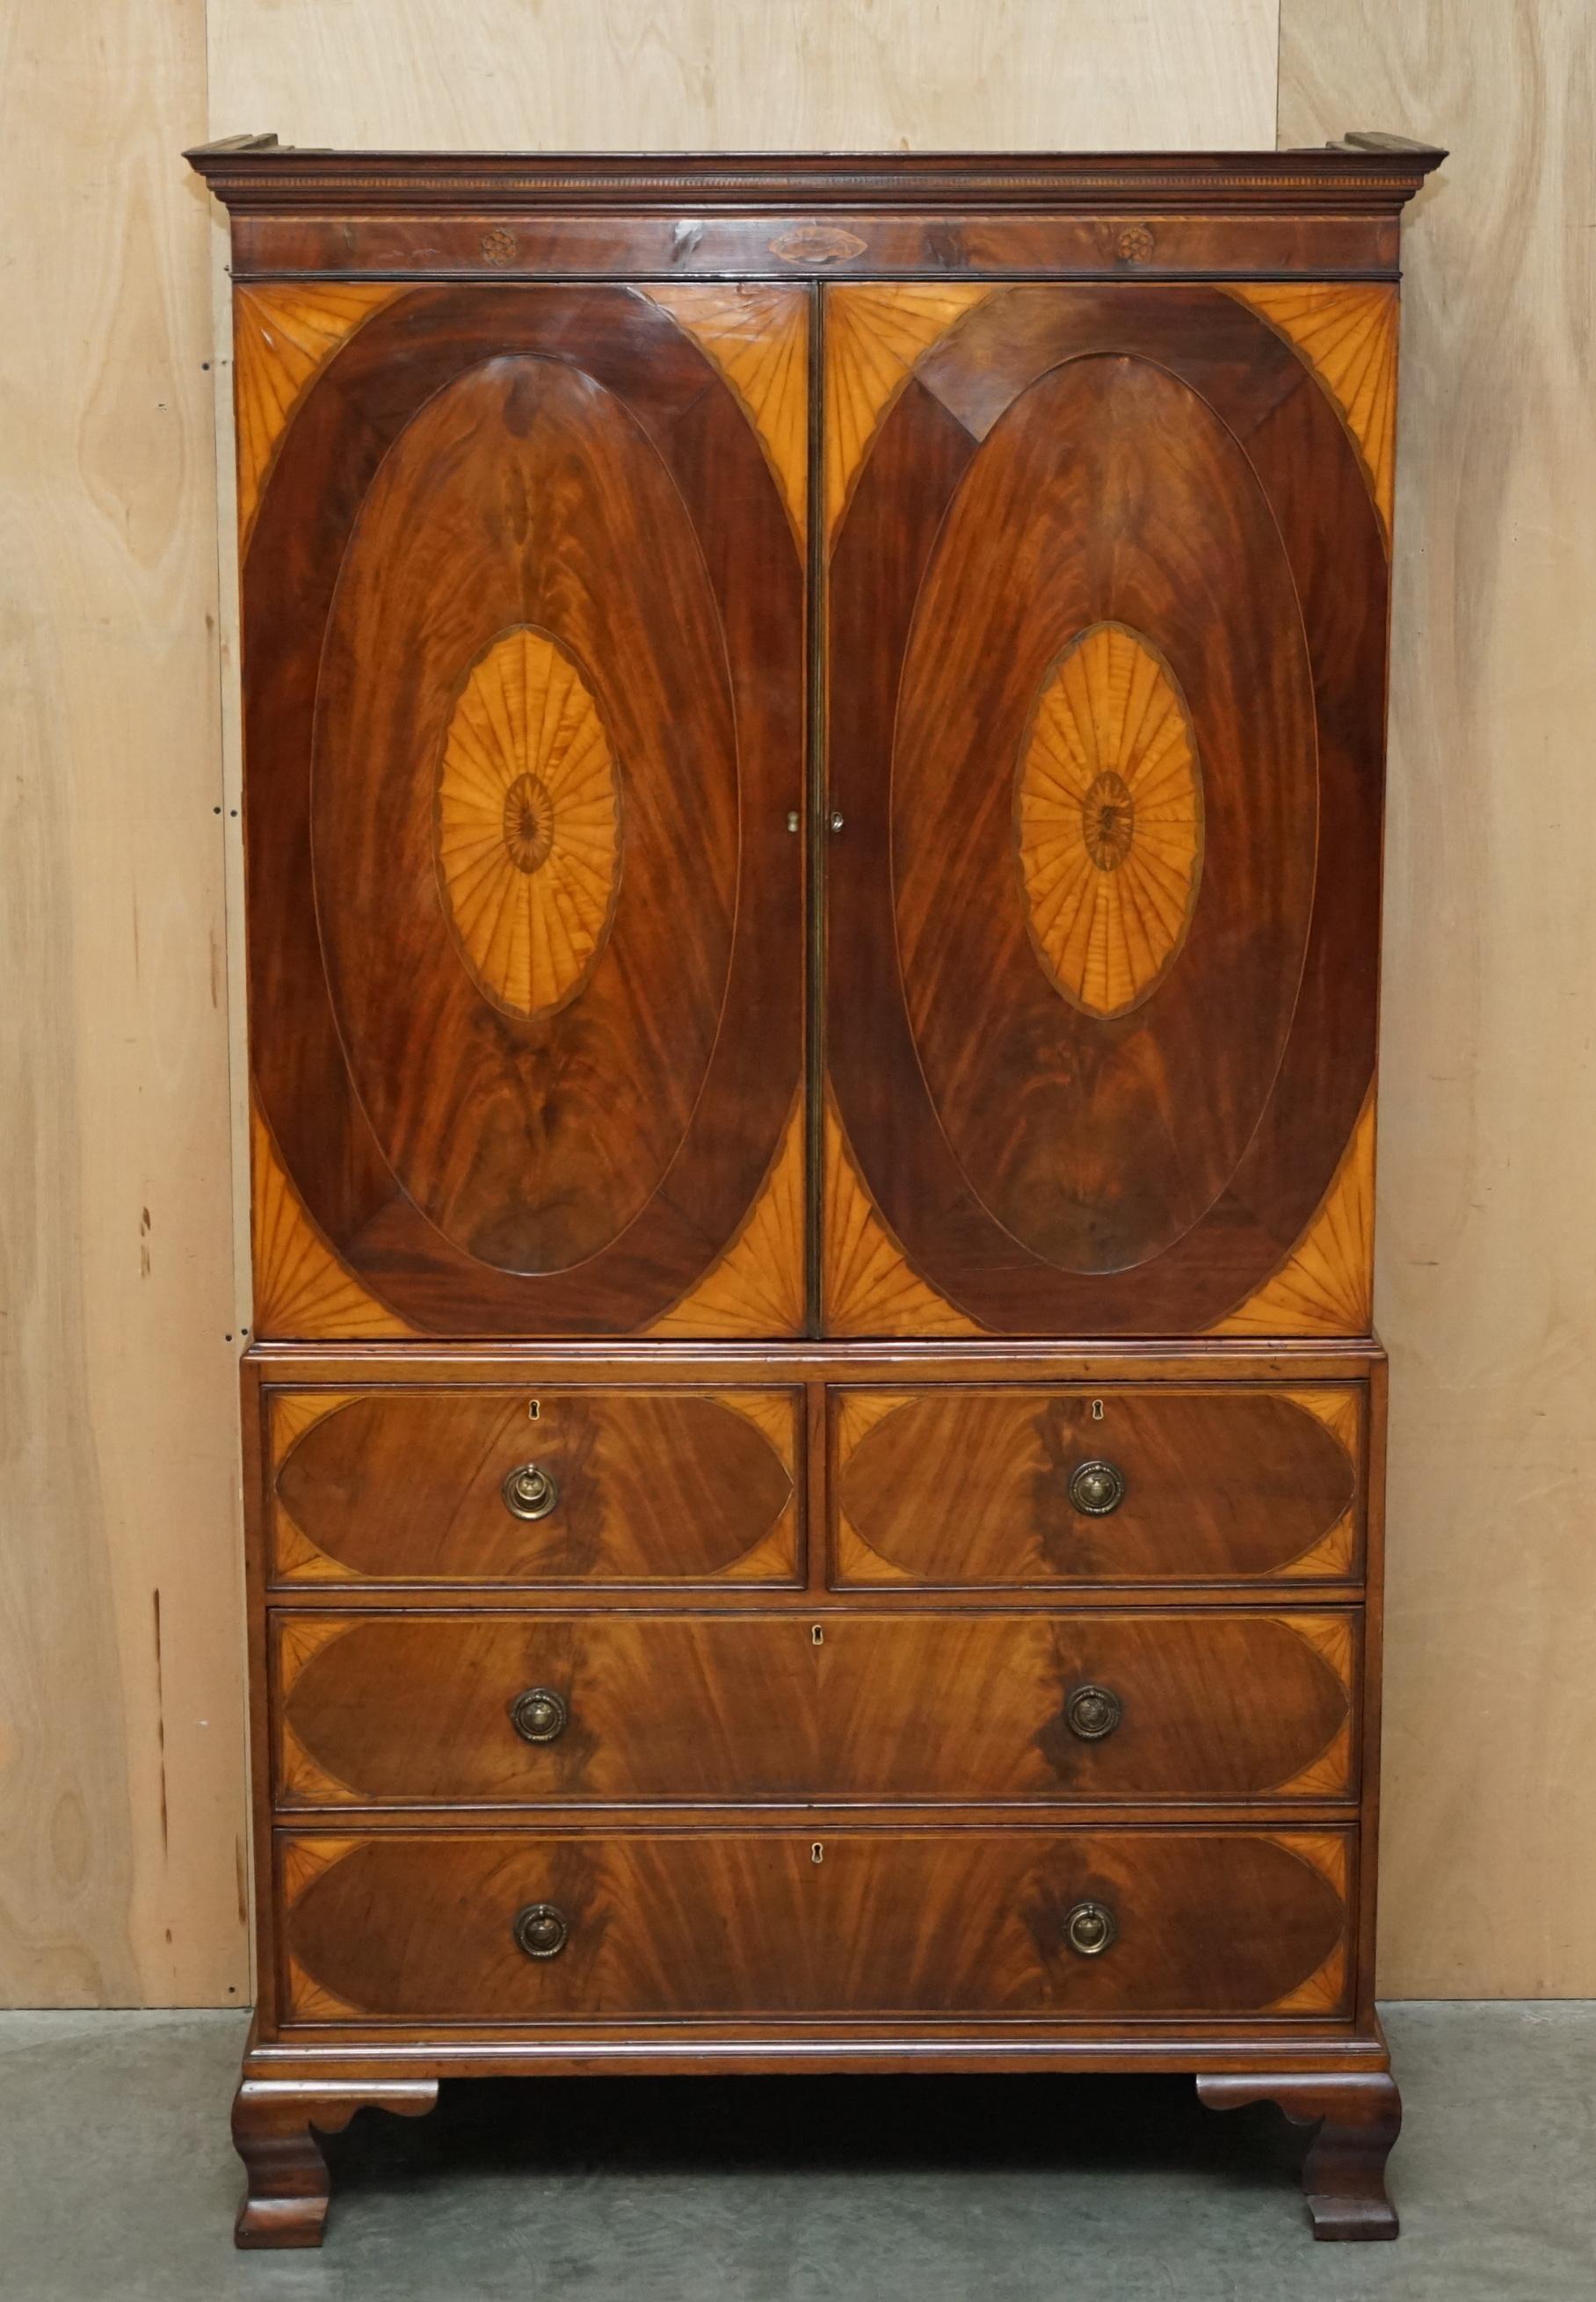 Royal House Antiques

Royal House Antiques is delighted to offer for sale this lovely original, fully restored George III Sheraton inlay circa 1760-1780 linen press wardrobe with two over two drawer base 

Please note the delivery fee listed is just